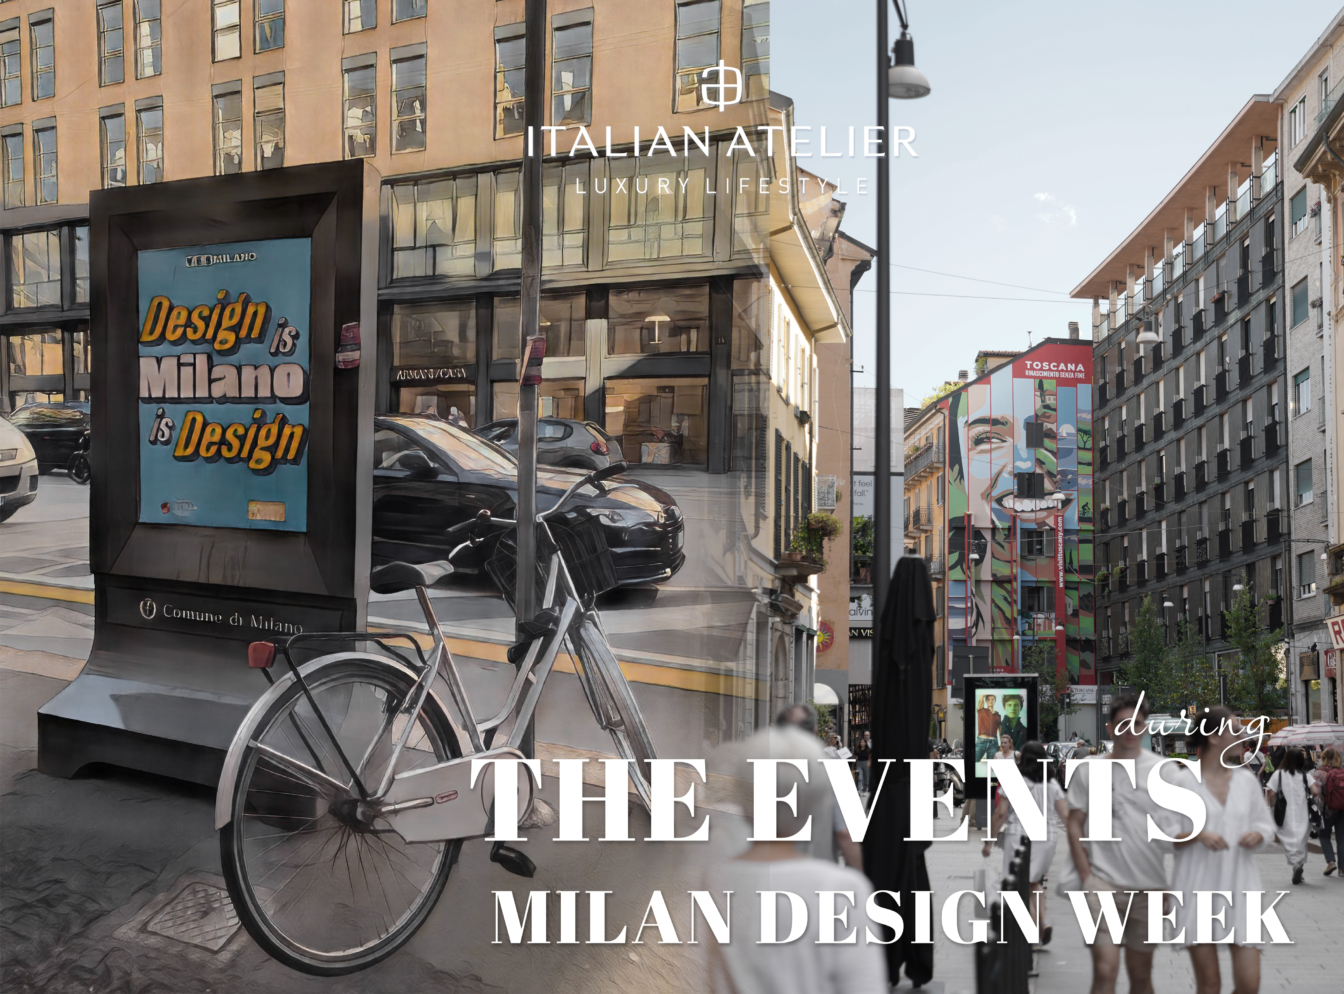 The Events during Milan Design Week